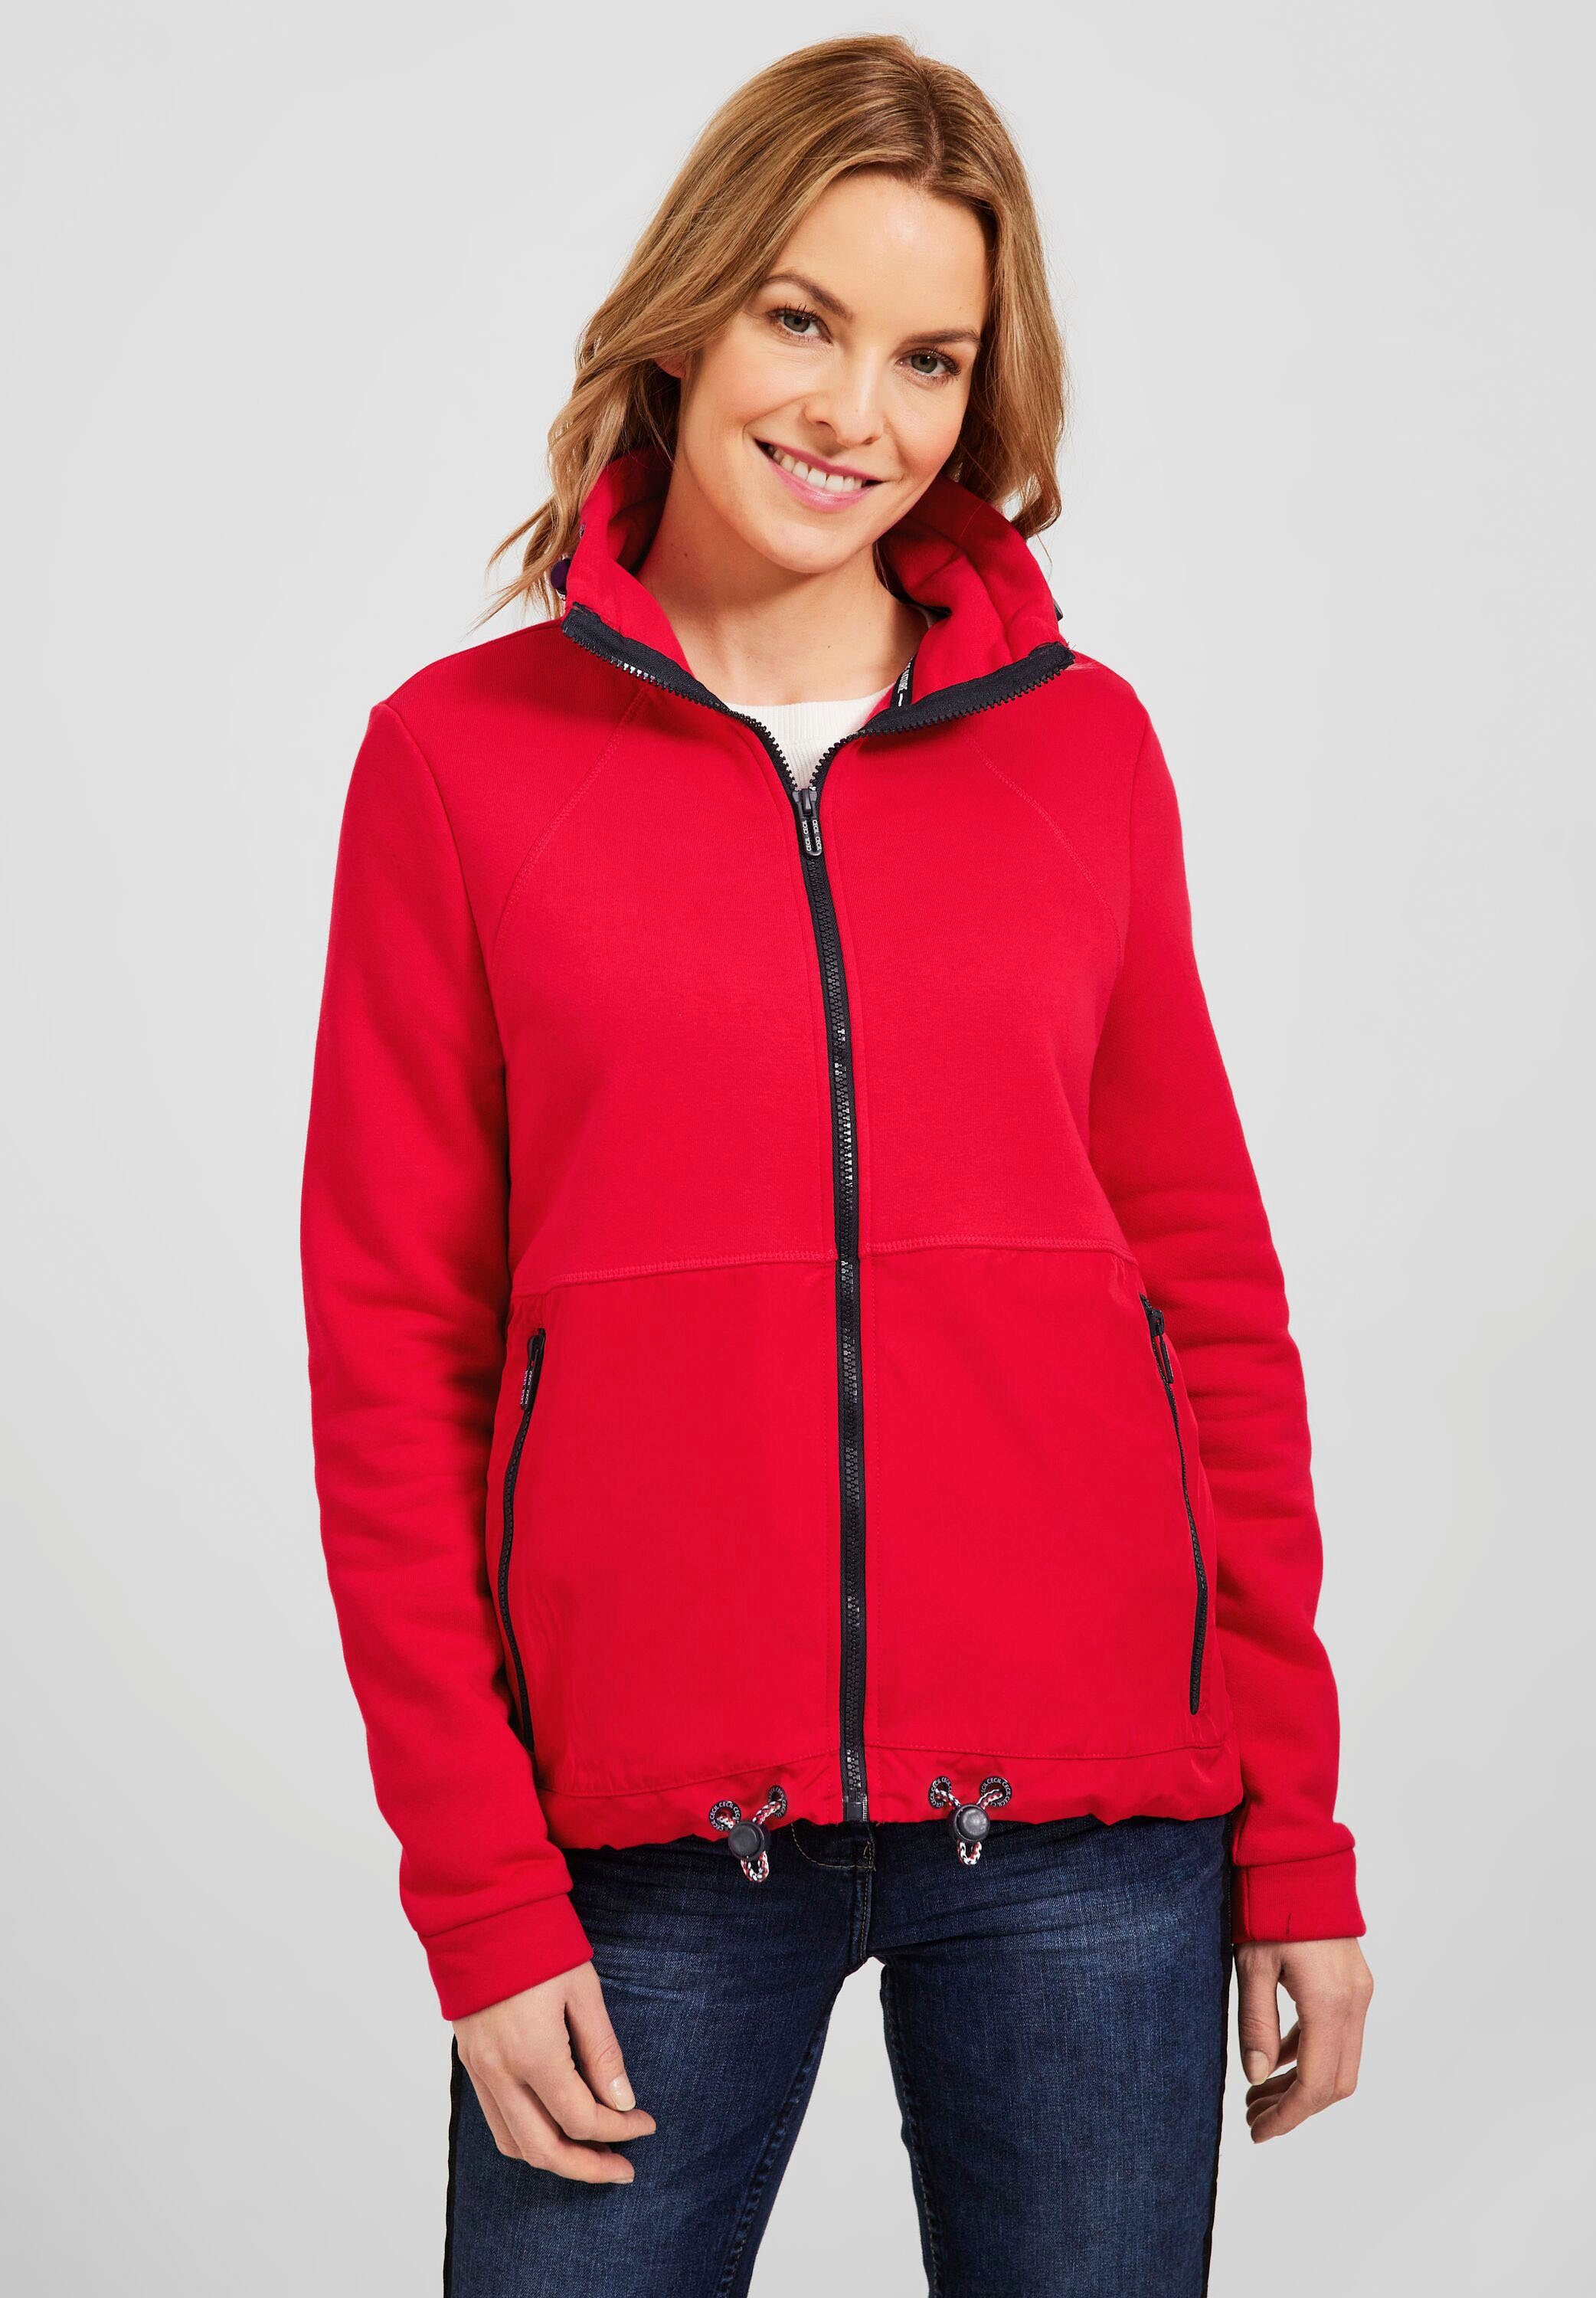 Cecil Sweatjacke im modernen Materialmix strong red